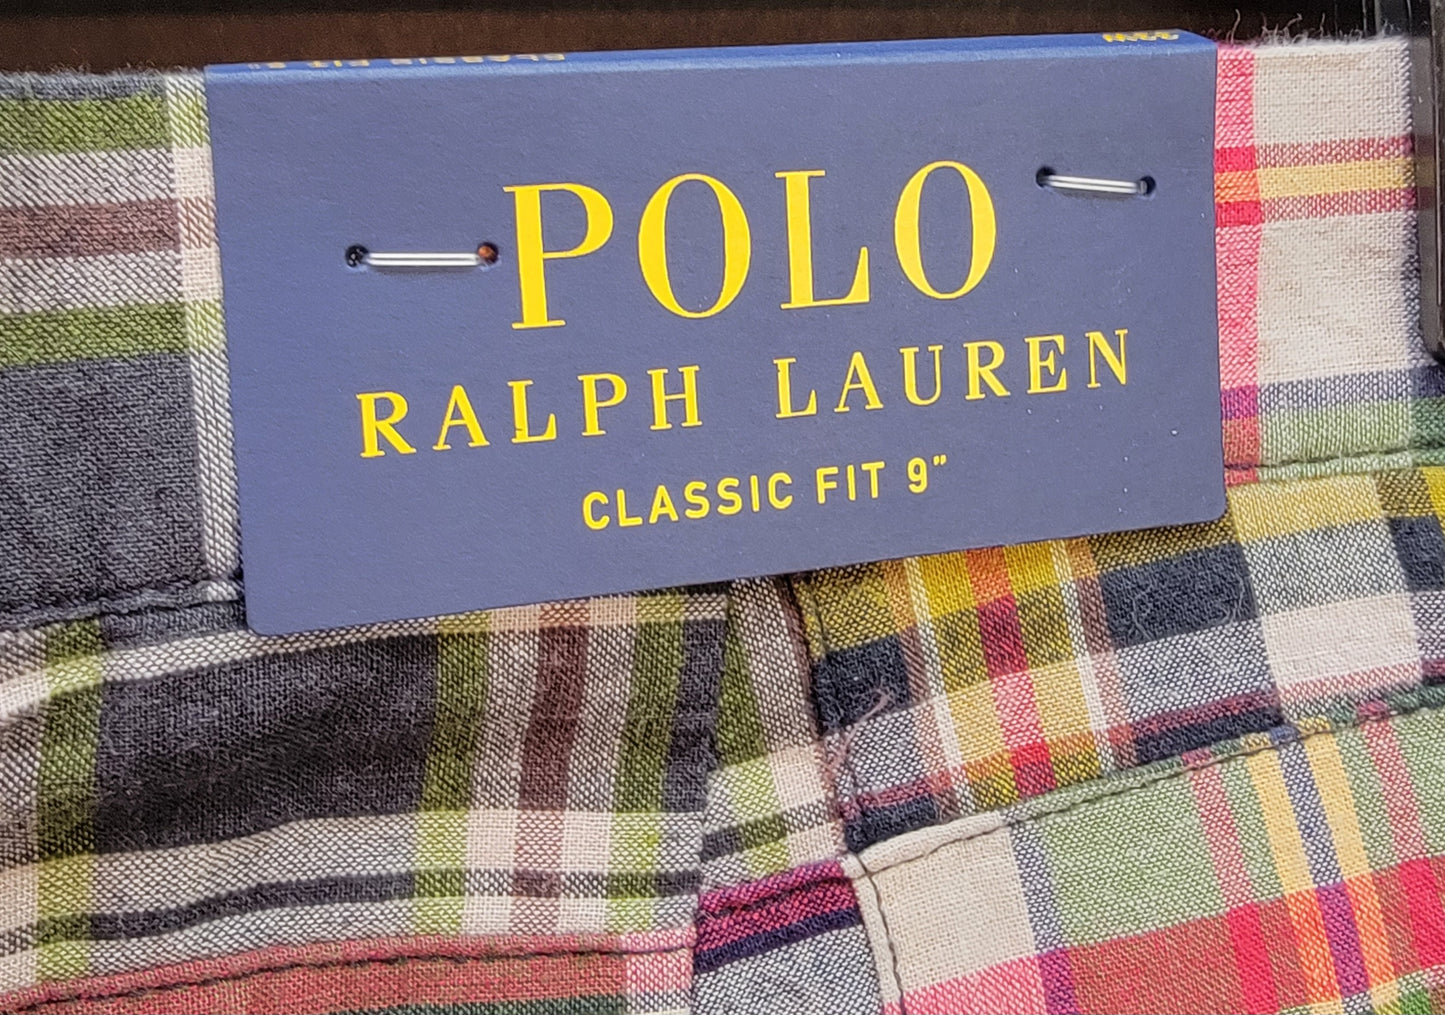 POLO Men's Ralph Lauren Classic Fit Bedford Shorts, Size 33, Classic Fit 9" Retail $98.50 New with Tags